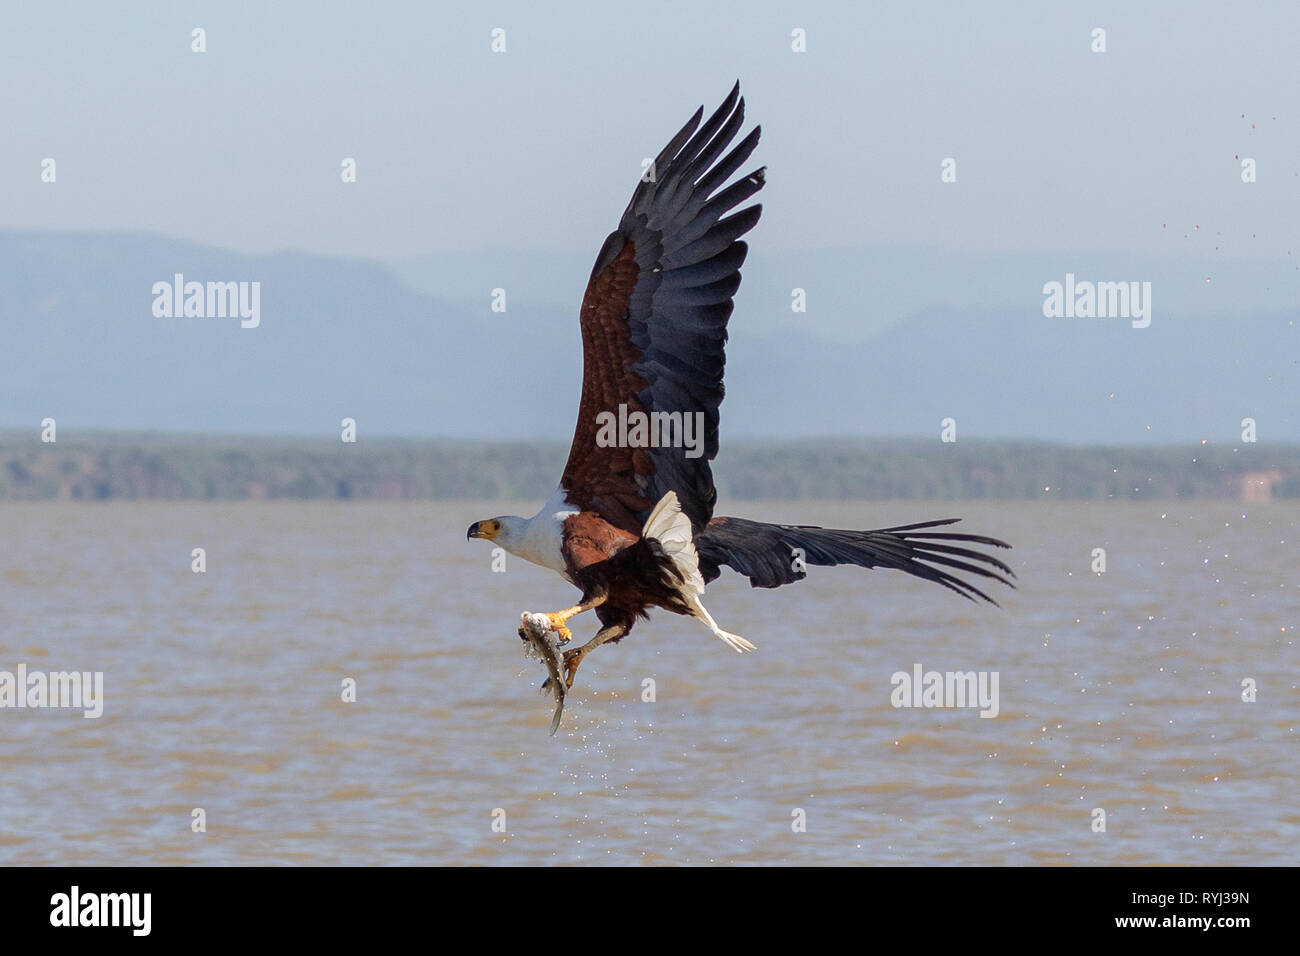 African Sea Eagle swooping for fish, Kenya, Africa Stock Photo